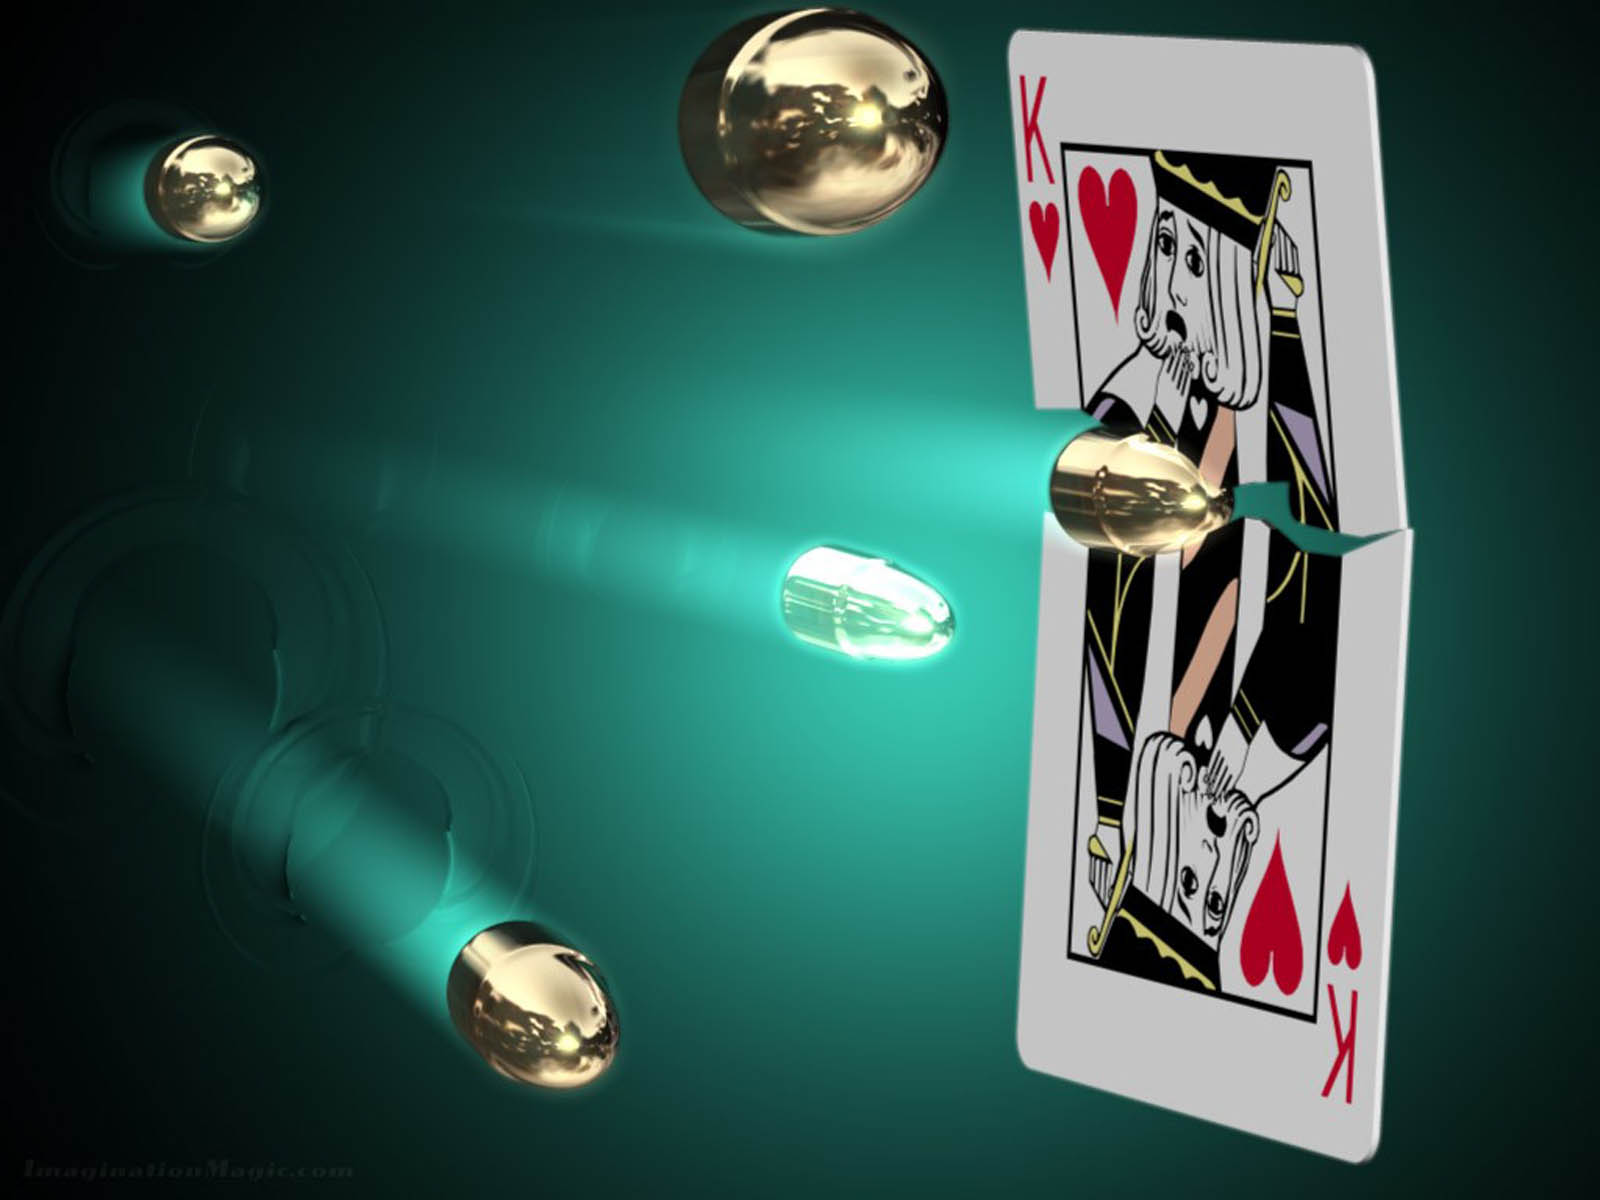 king card hd wallpaper,games,design,graphic design,photography,space